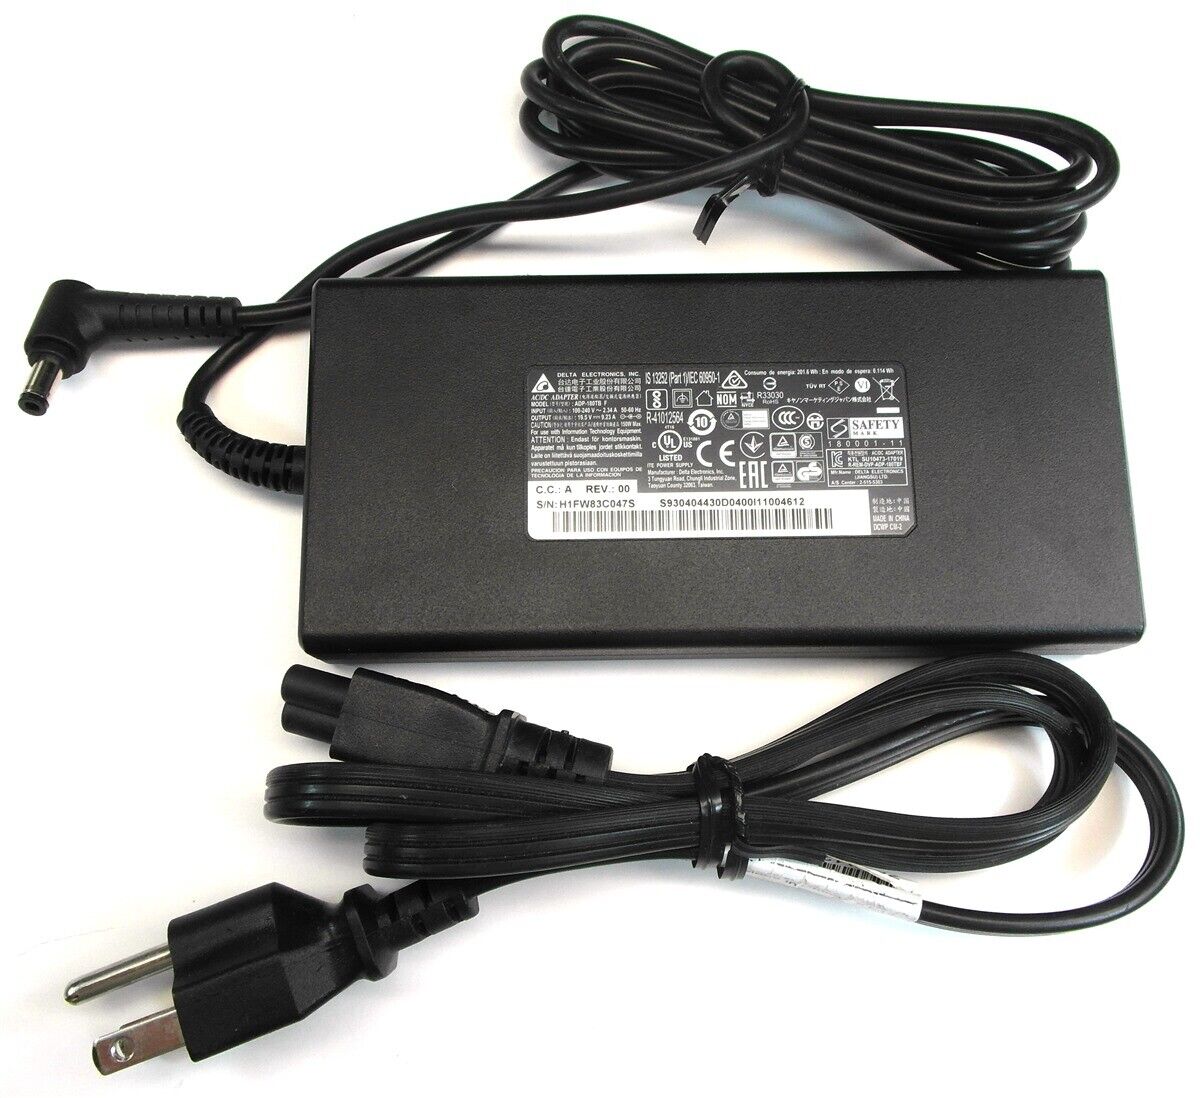 Delta Razer Blade Laptop Charger AC Power Adapter ADP-180TB F 19.5V 9.23A 180W